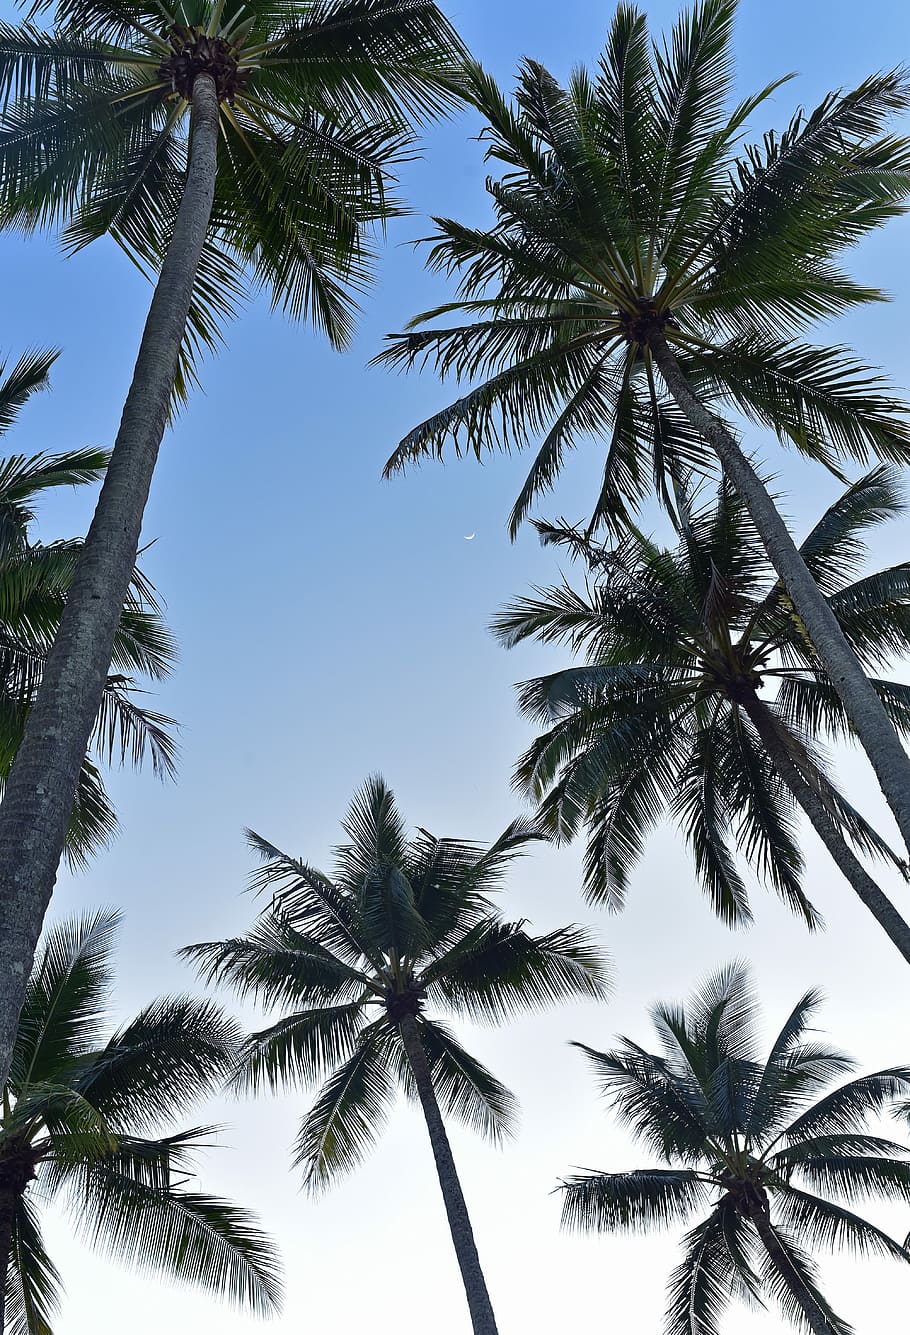 worm's eye view photography of coconut trees, worm's-eye view photography of palm trees under clear blue sky